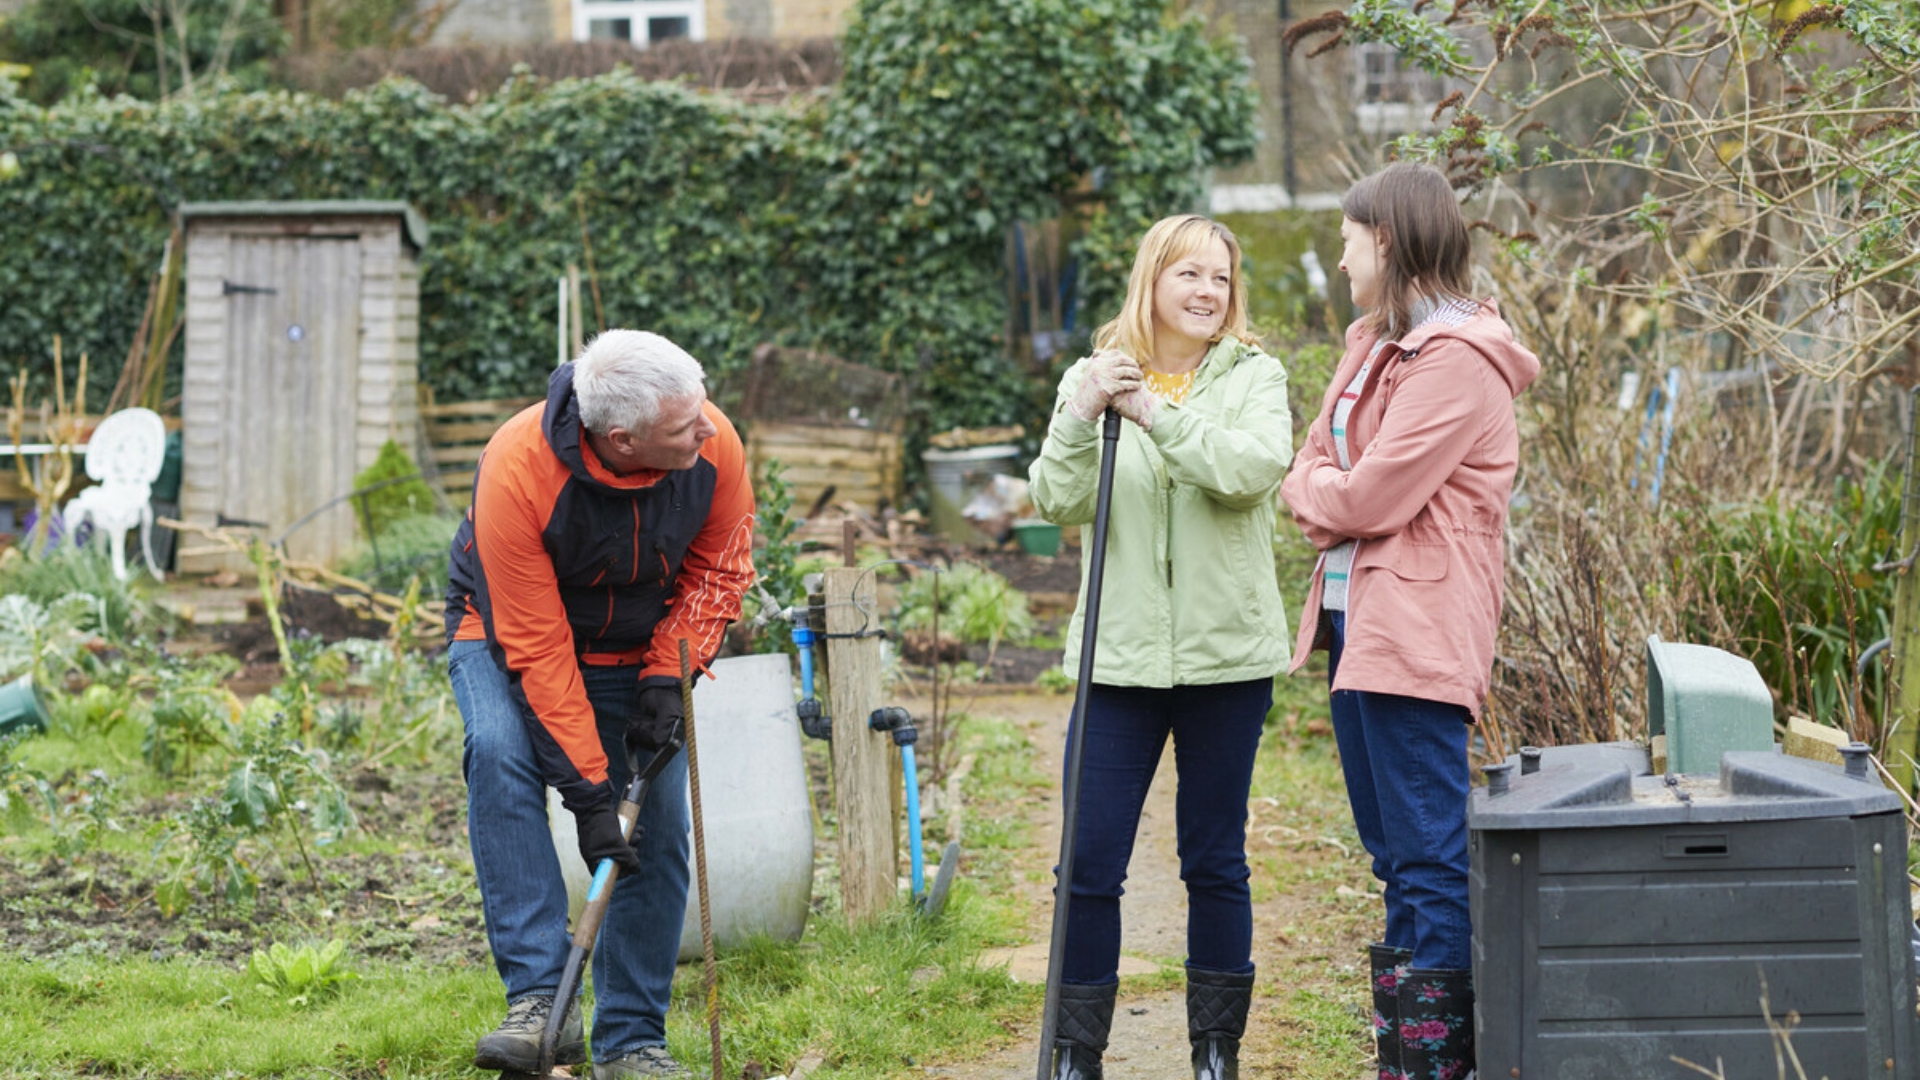 family of a dad, mum and daughter doing gardening